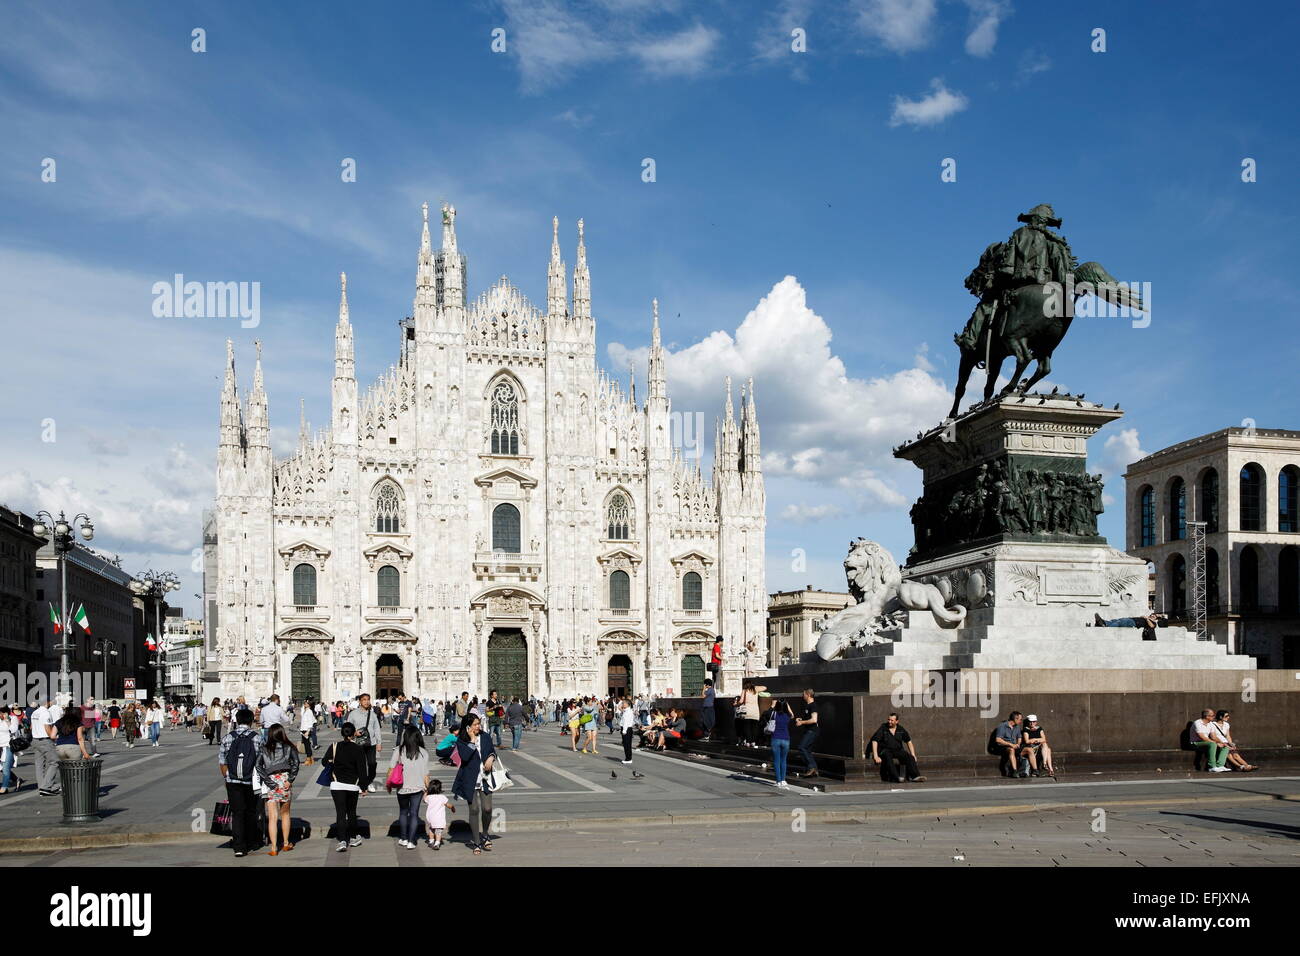 Piazza del Duomo with equestrian statue and Milan Cathedral, Milan, Lombardy, Italy Stock Photo